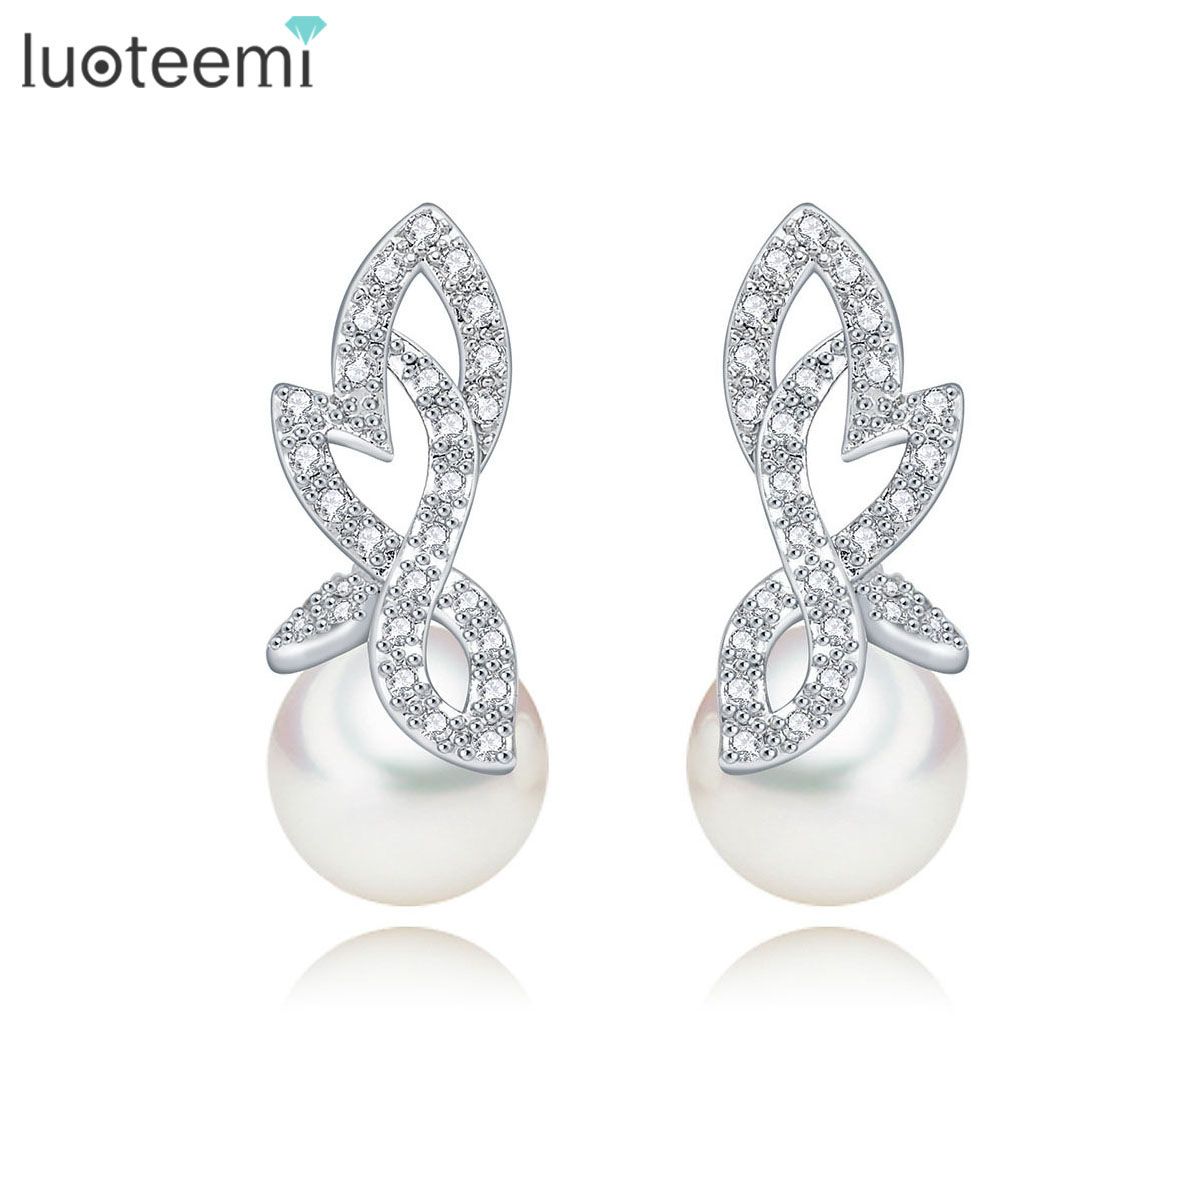 2018 Luoteemi New Vintage Cute Drop Earrings Micro Pave Cz With Imitation Pearl Pendant Brincos For Girl Friend Christmas Gifts From Luoteemi